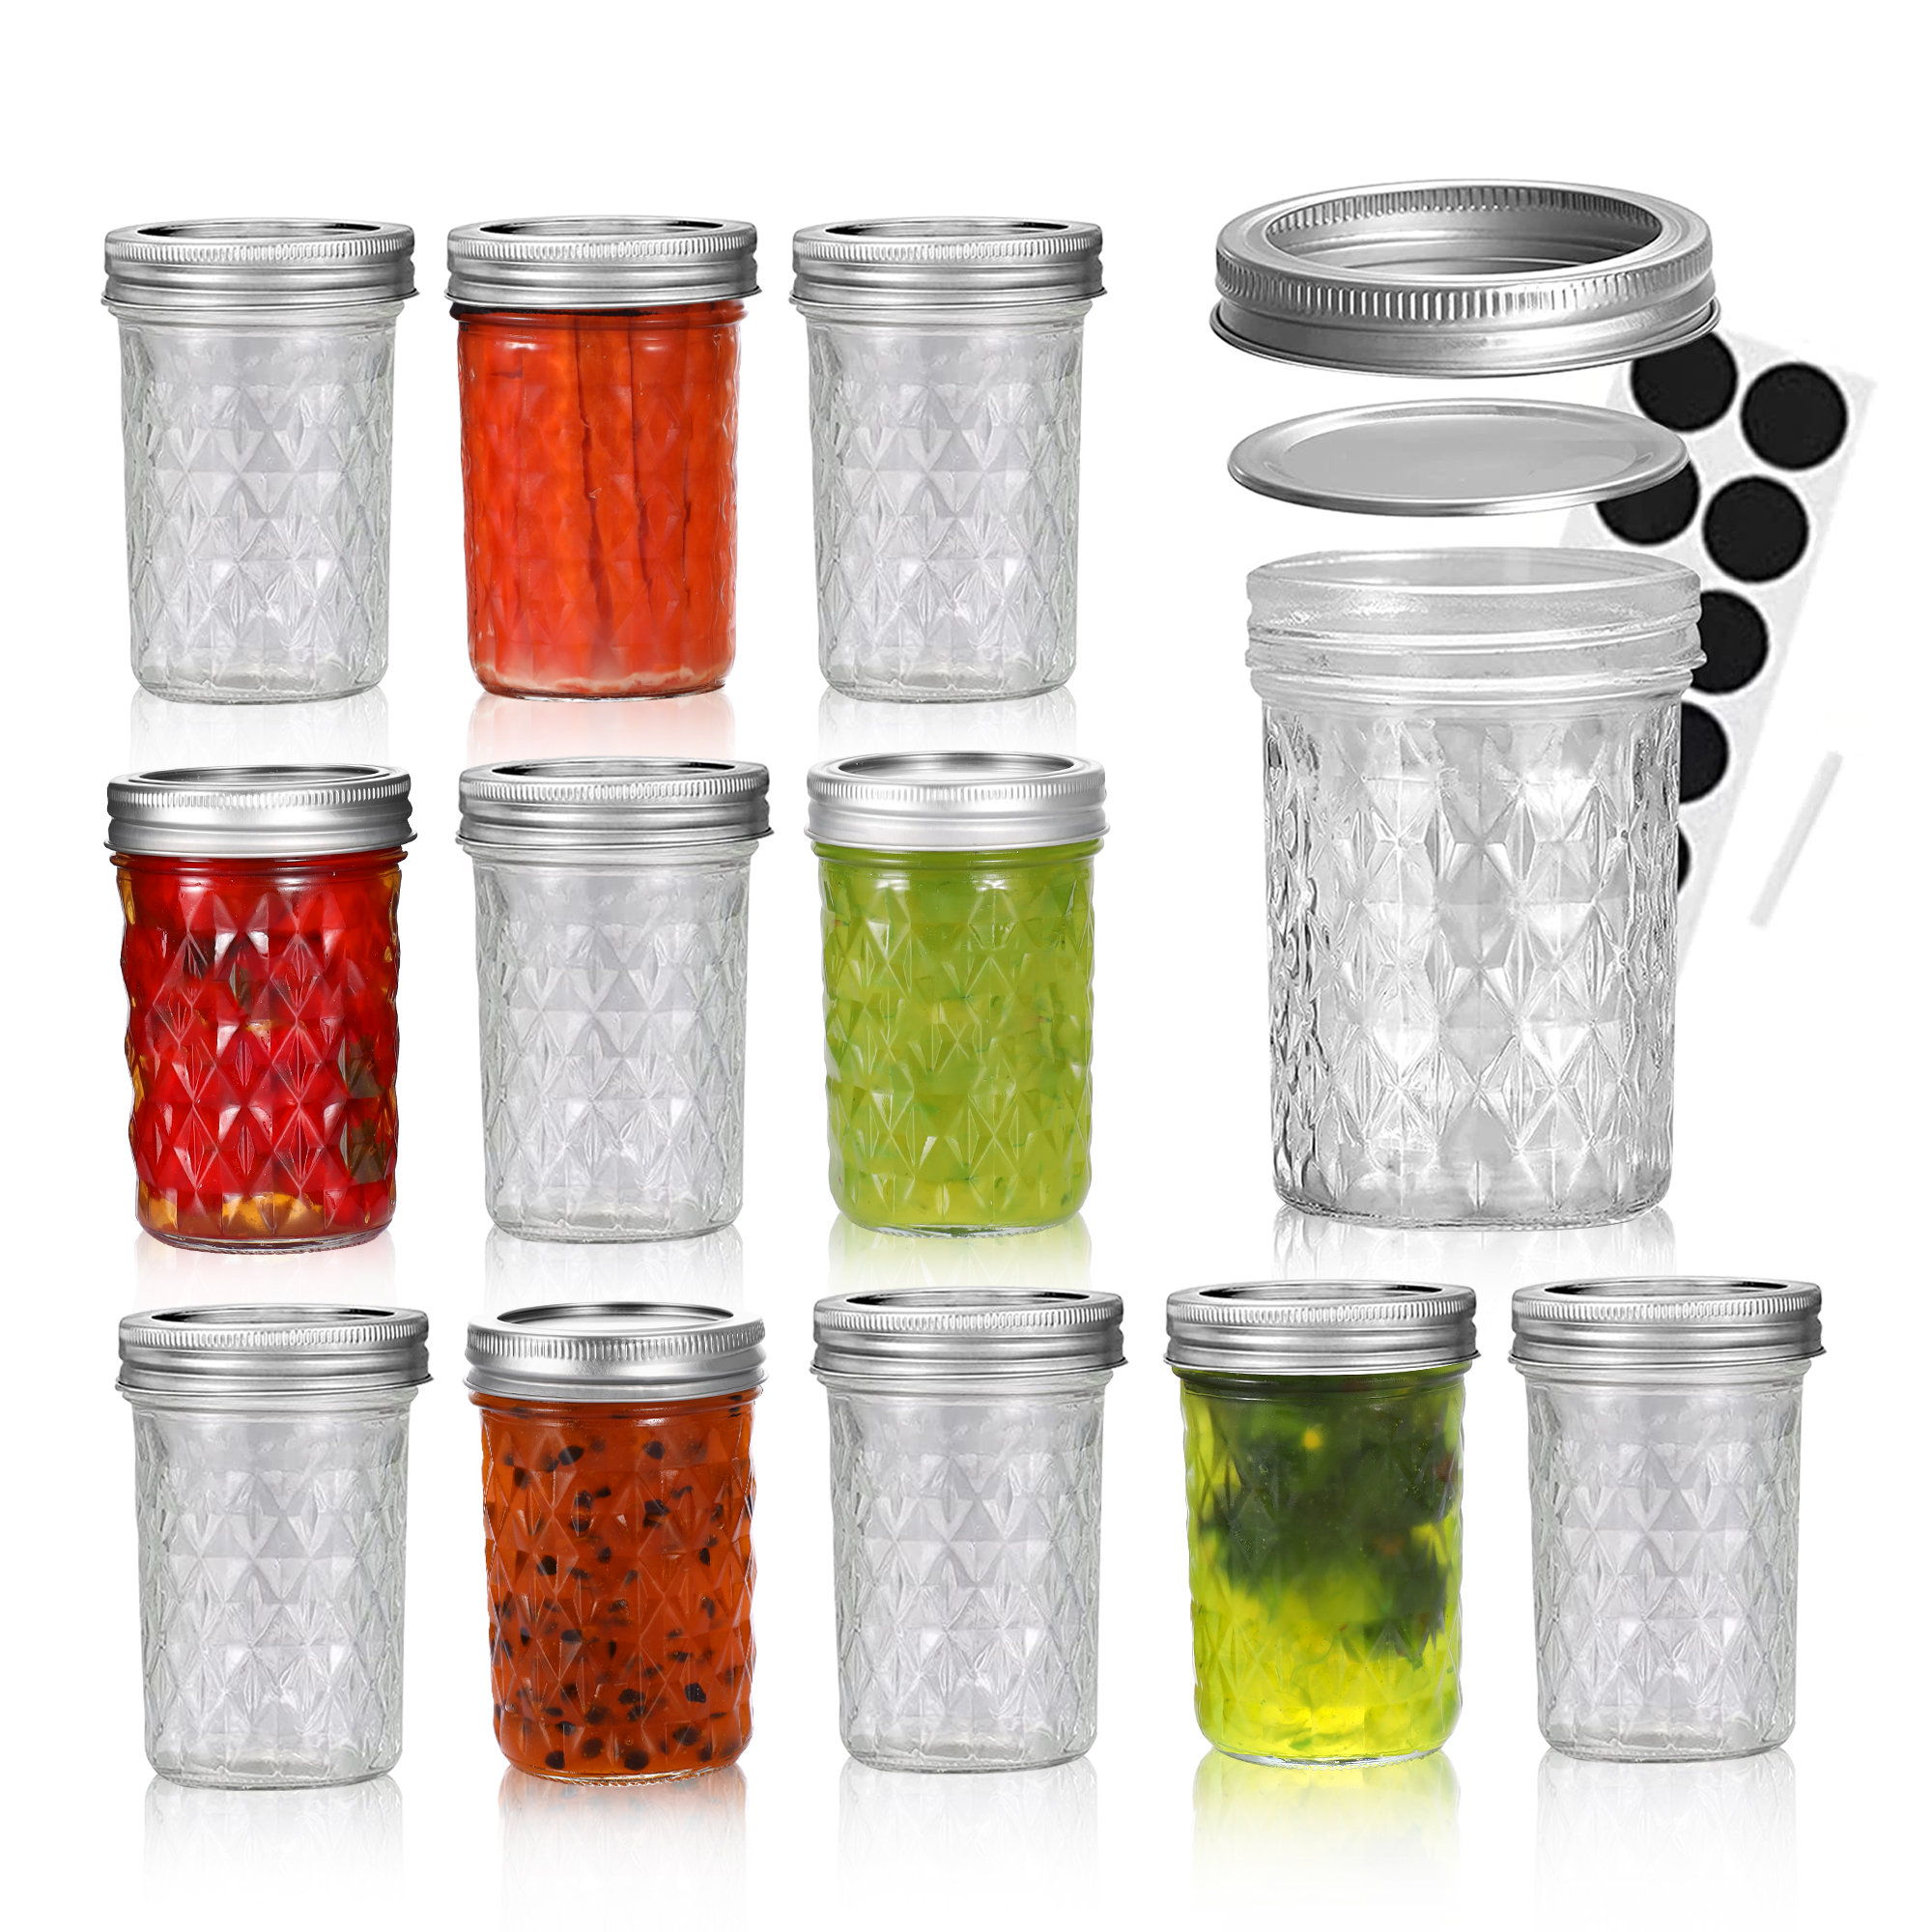 8 Ounce Regular Mouth Quilted Ball Mason Jars, No Lid